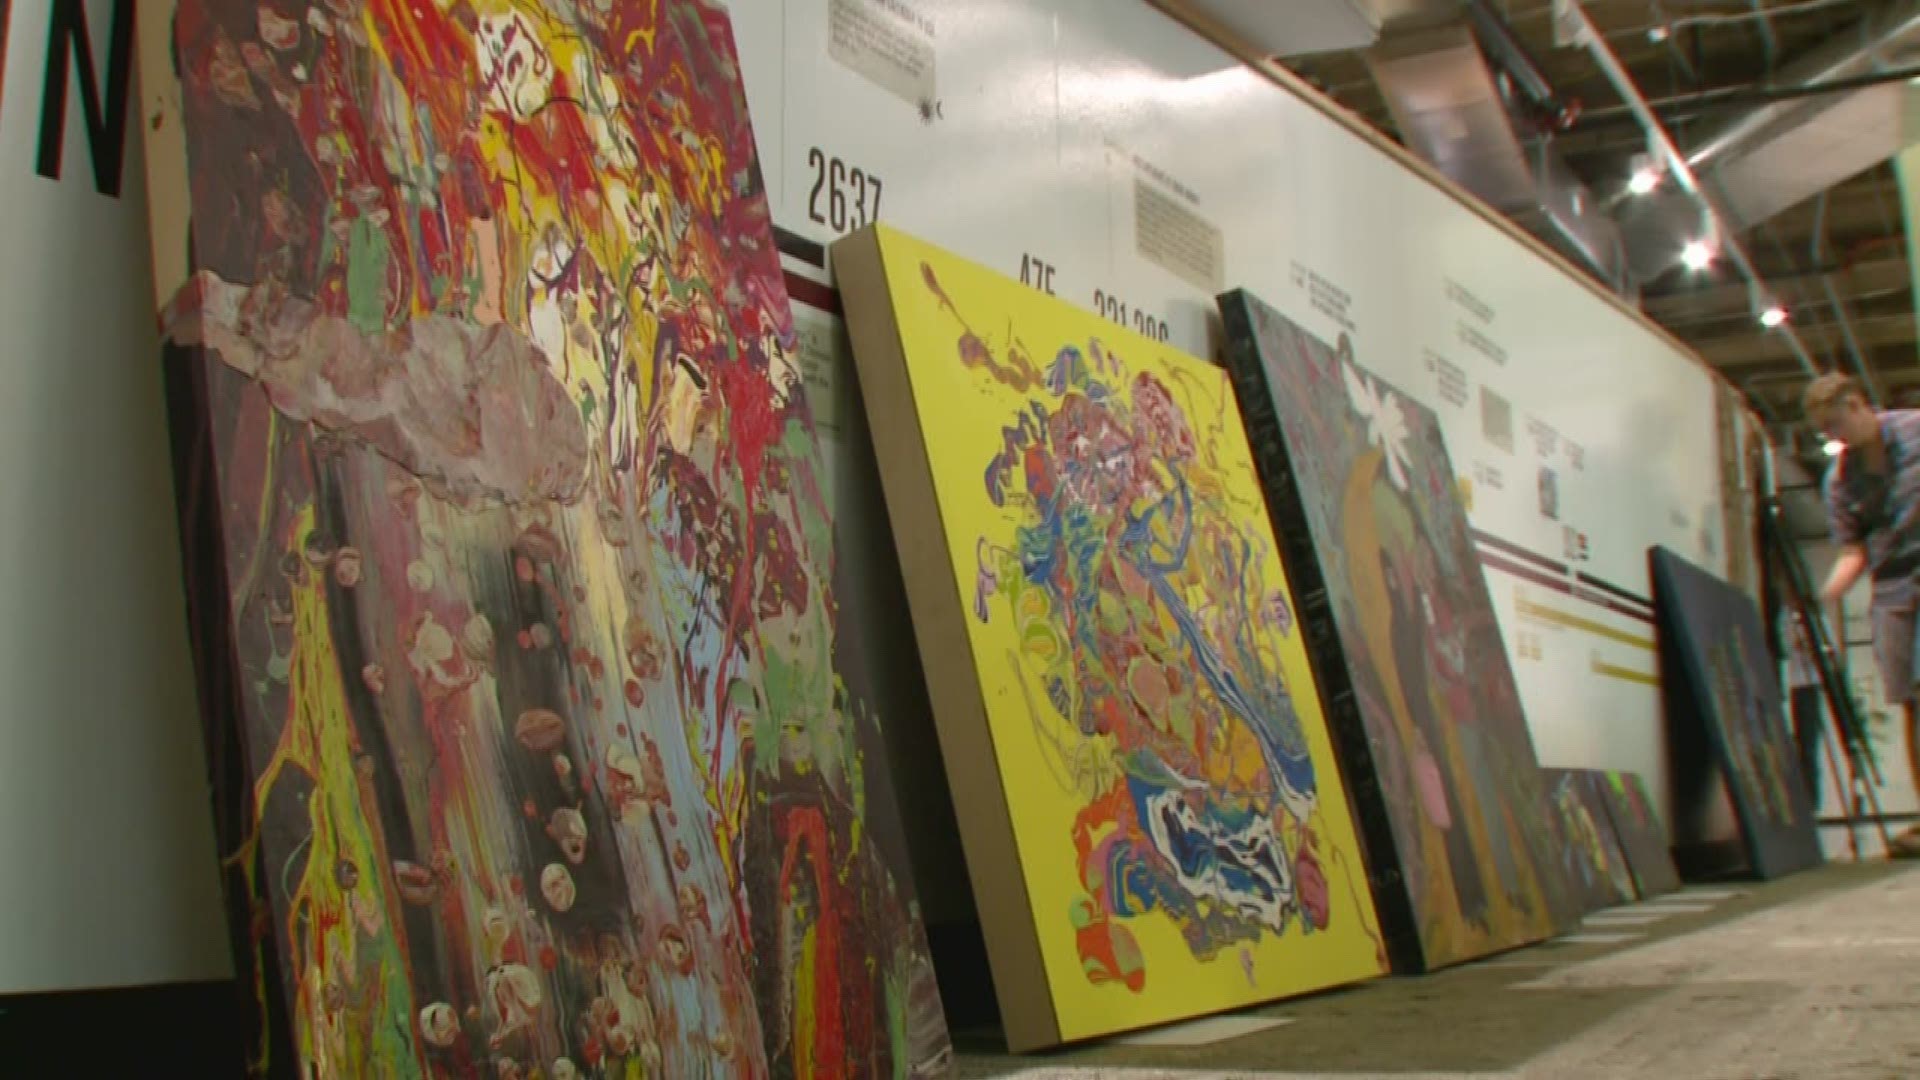 A group of local artists donated their work to an auction in hopes of raising money to help reunite families separated at the border. 